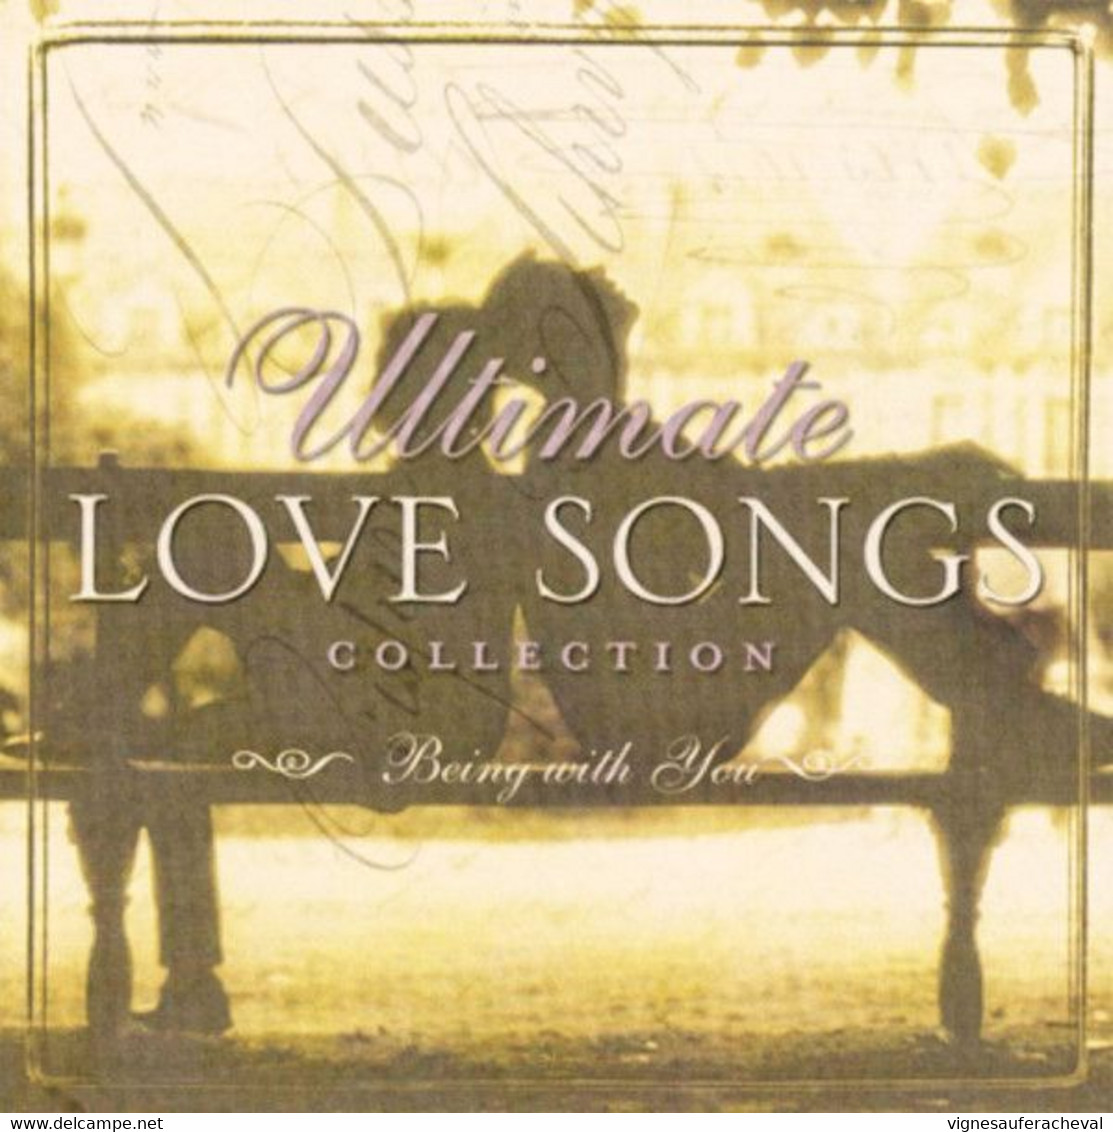 Ultimate Love Songs Collection: When A Man Loves A Woman - Compilations